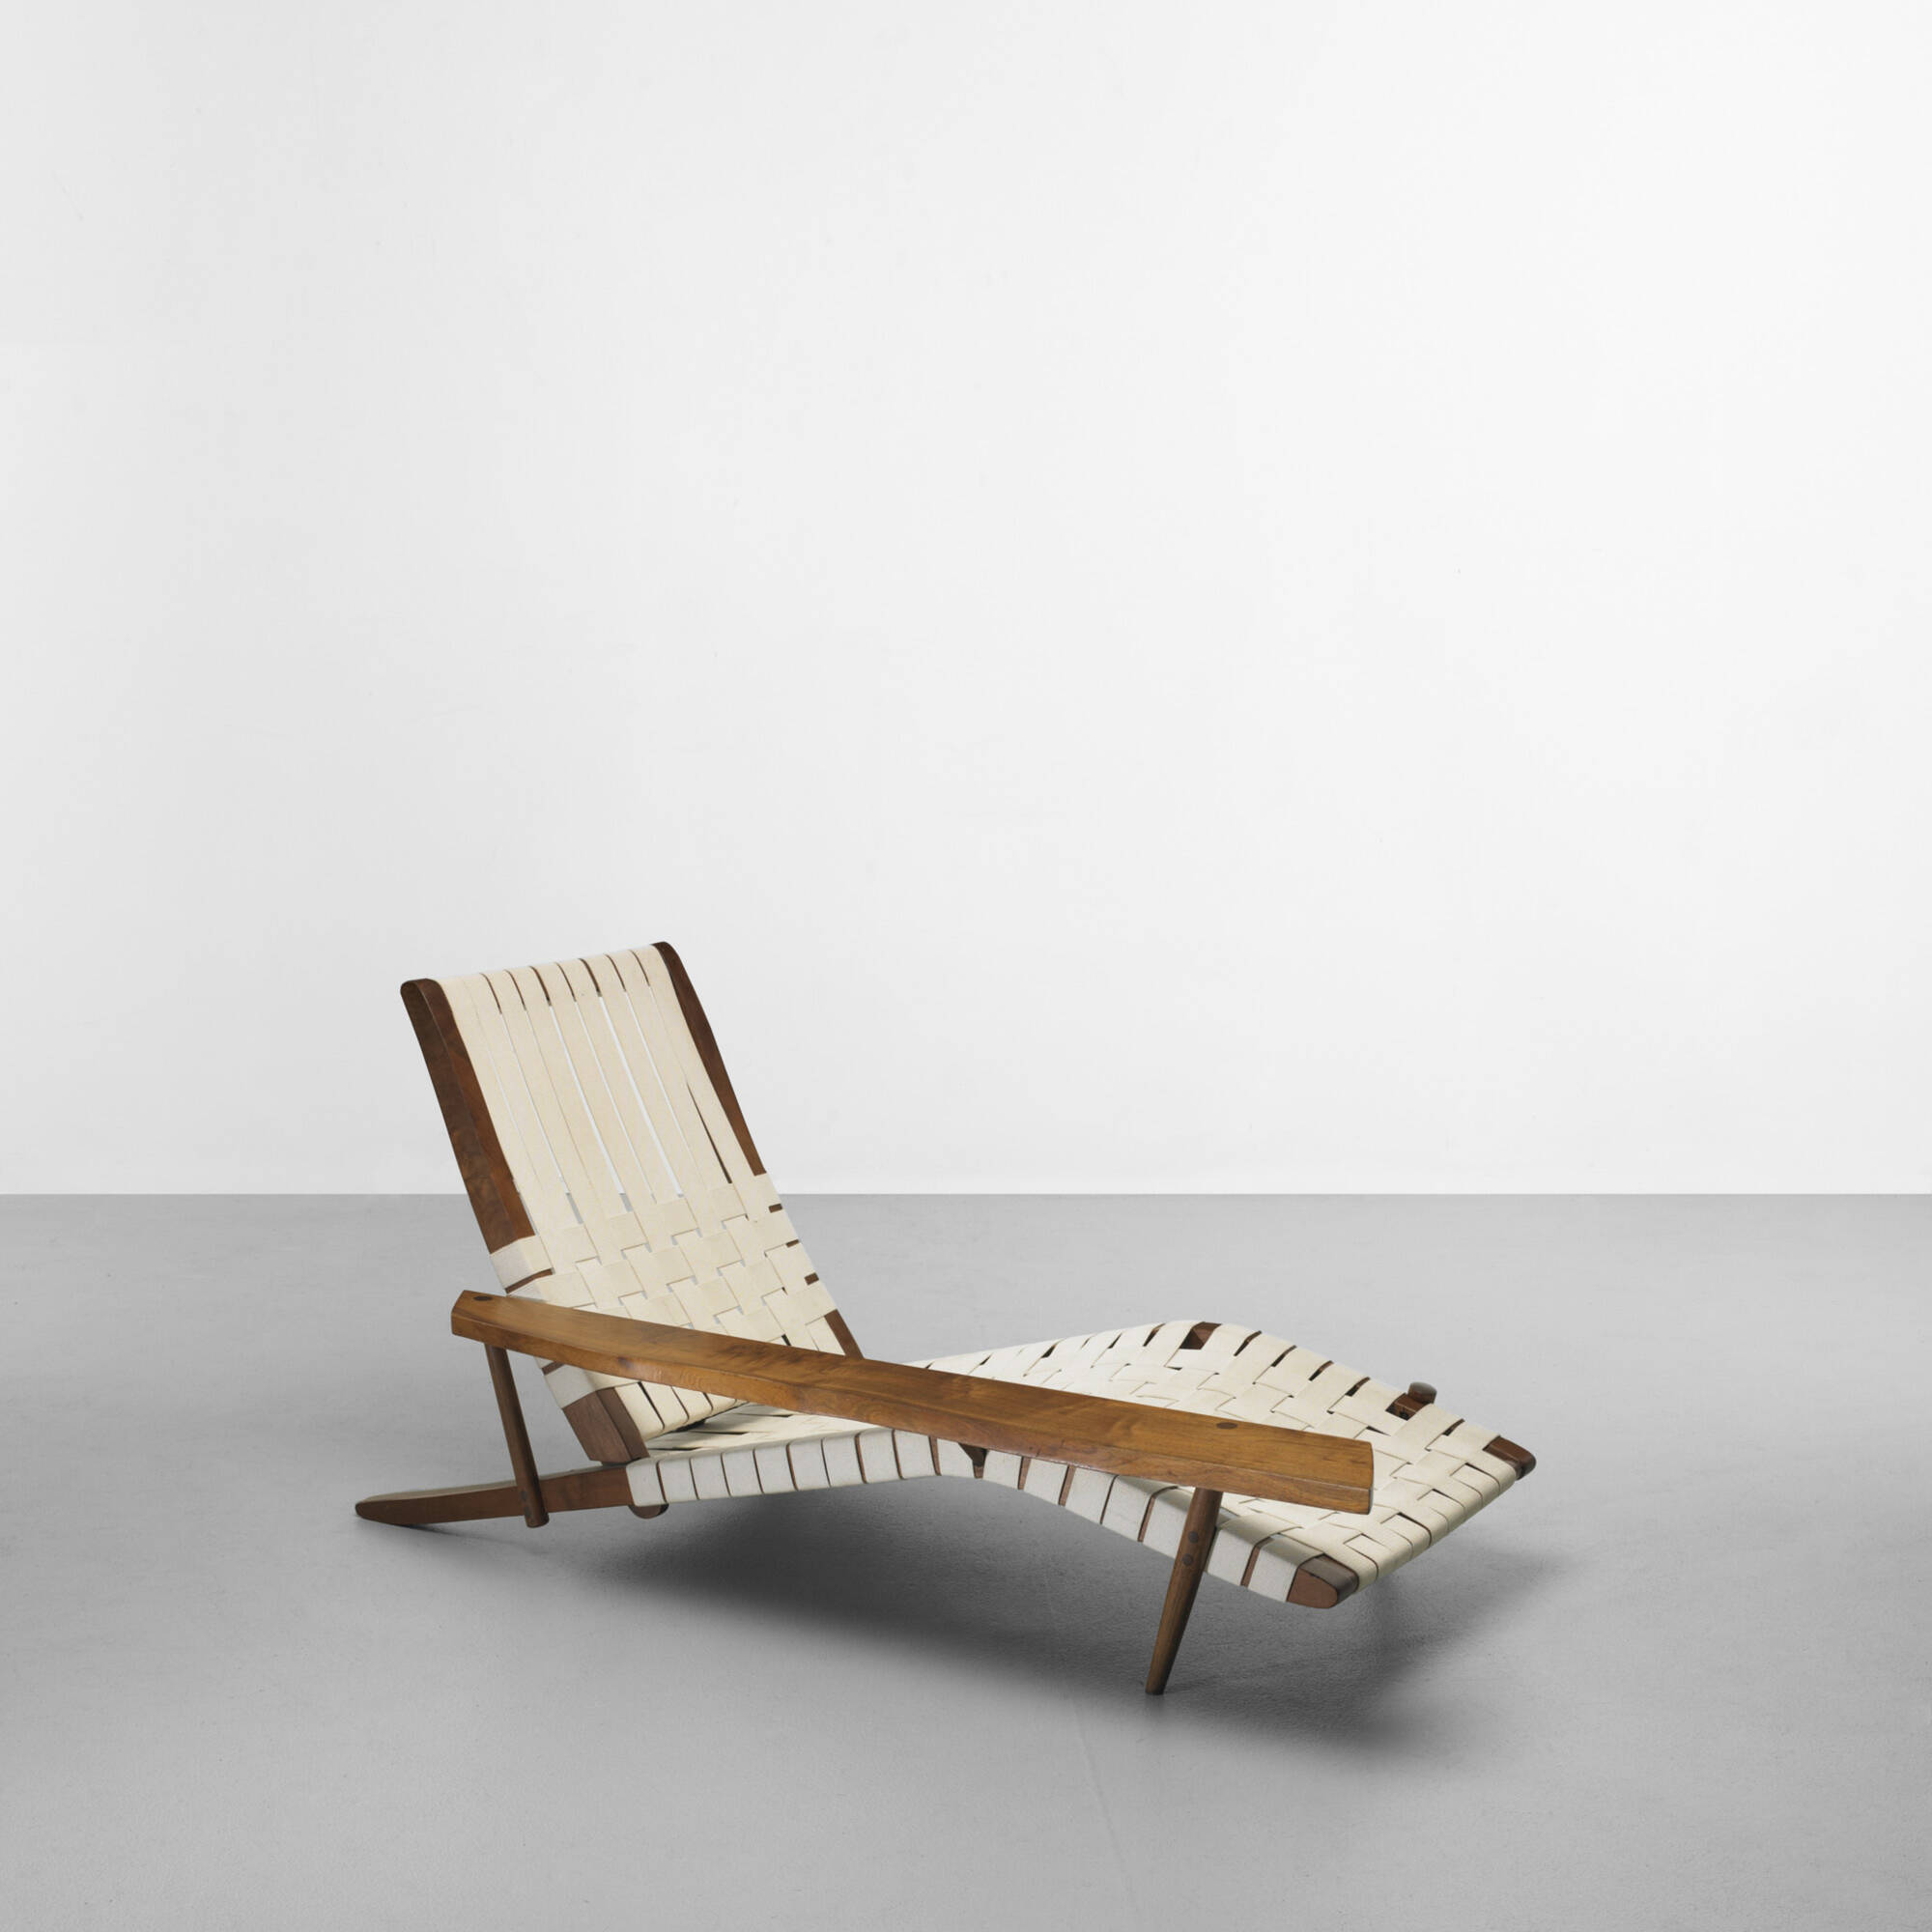 138: GEORGE NAKASHIMA, chair < Important Design, 15 December < Auctions | Wright: of and Design